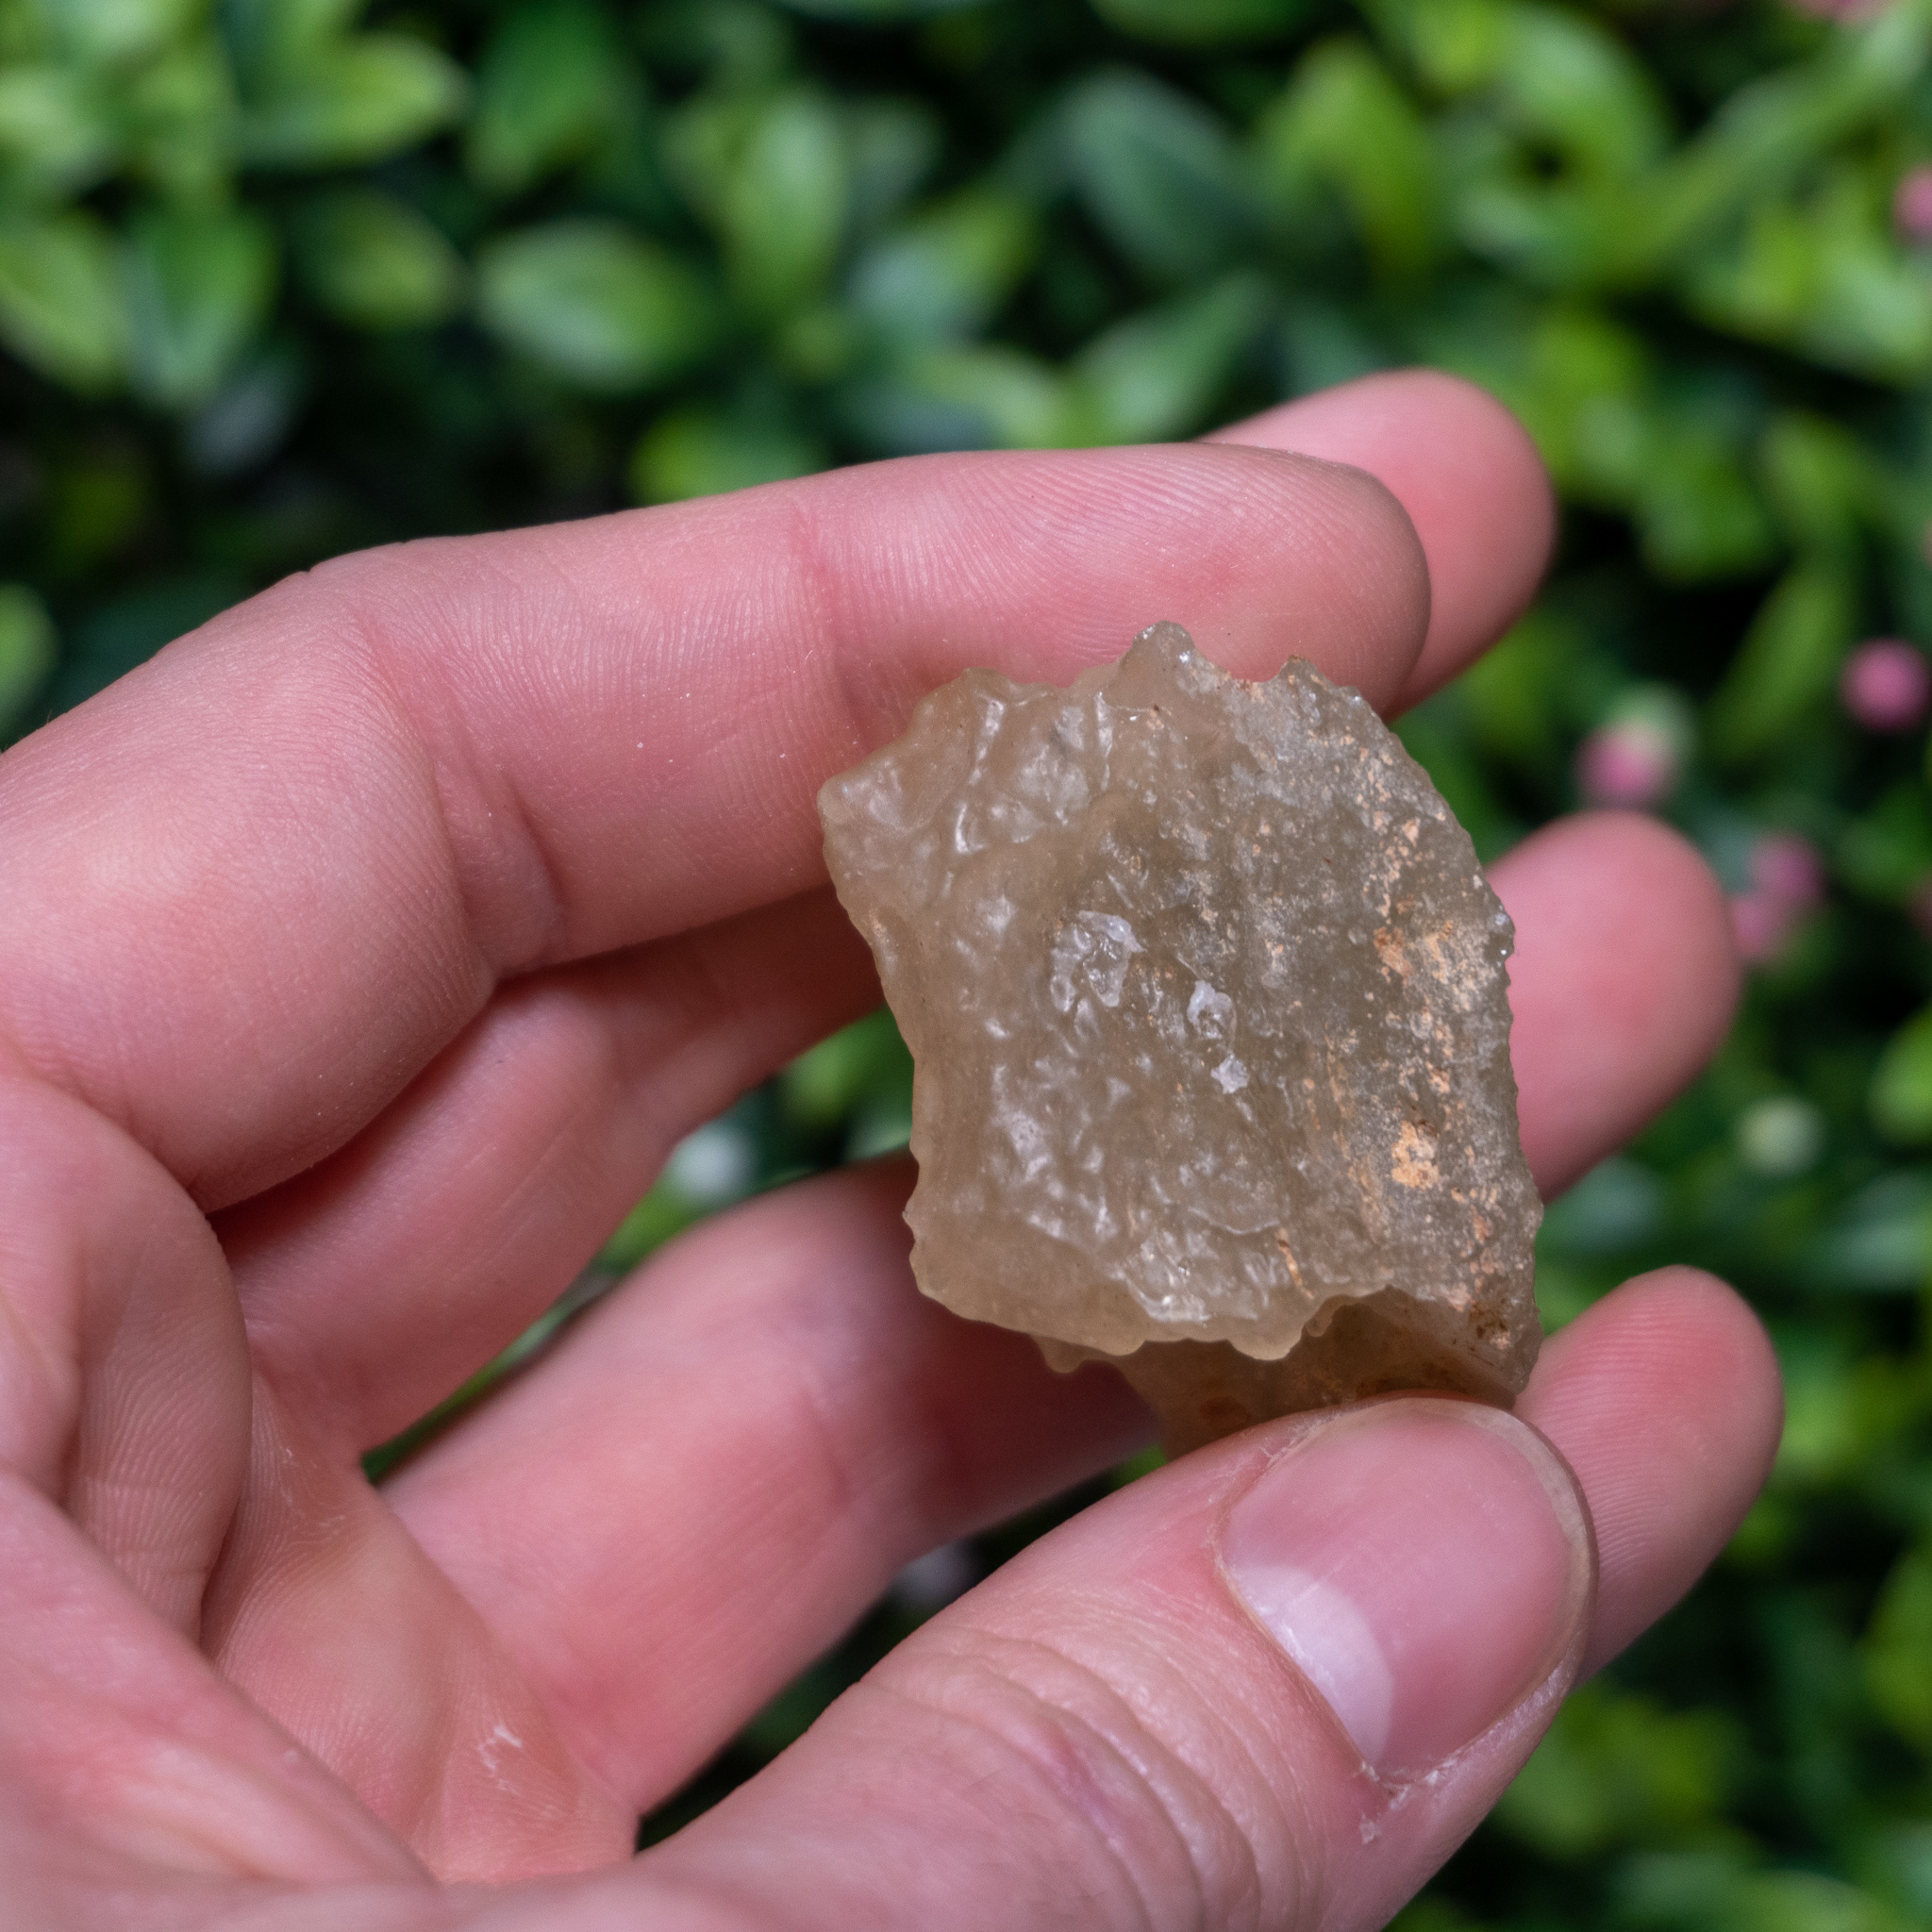 Large Libyan Desert Glass #3 - The Crystal Council